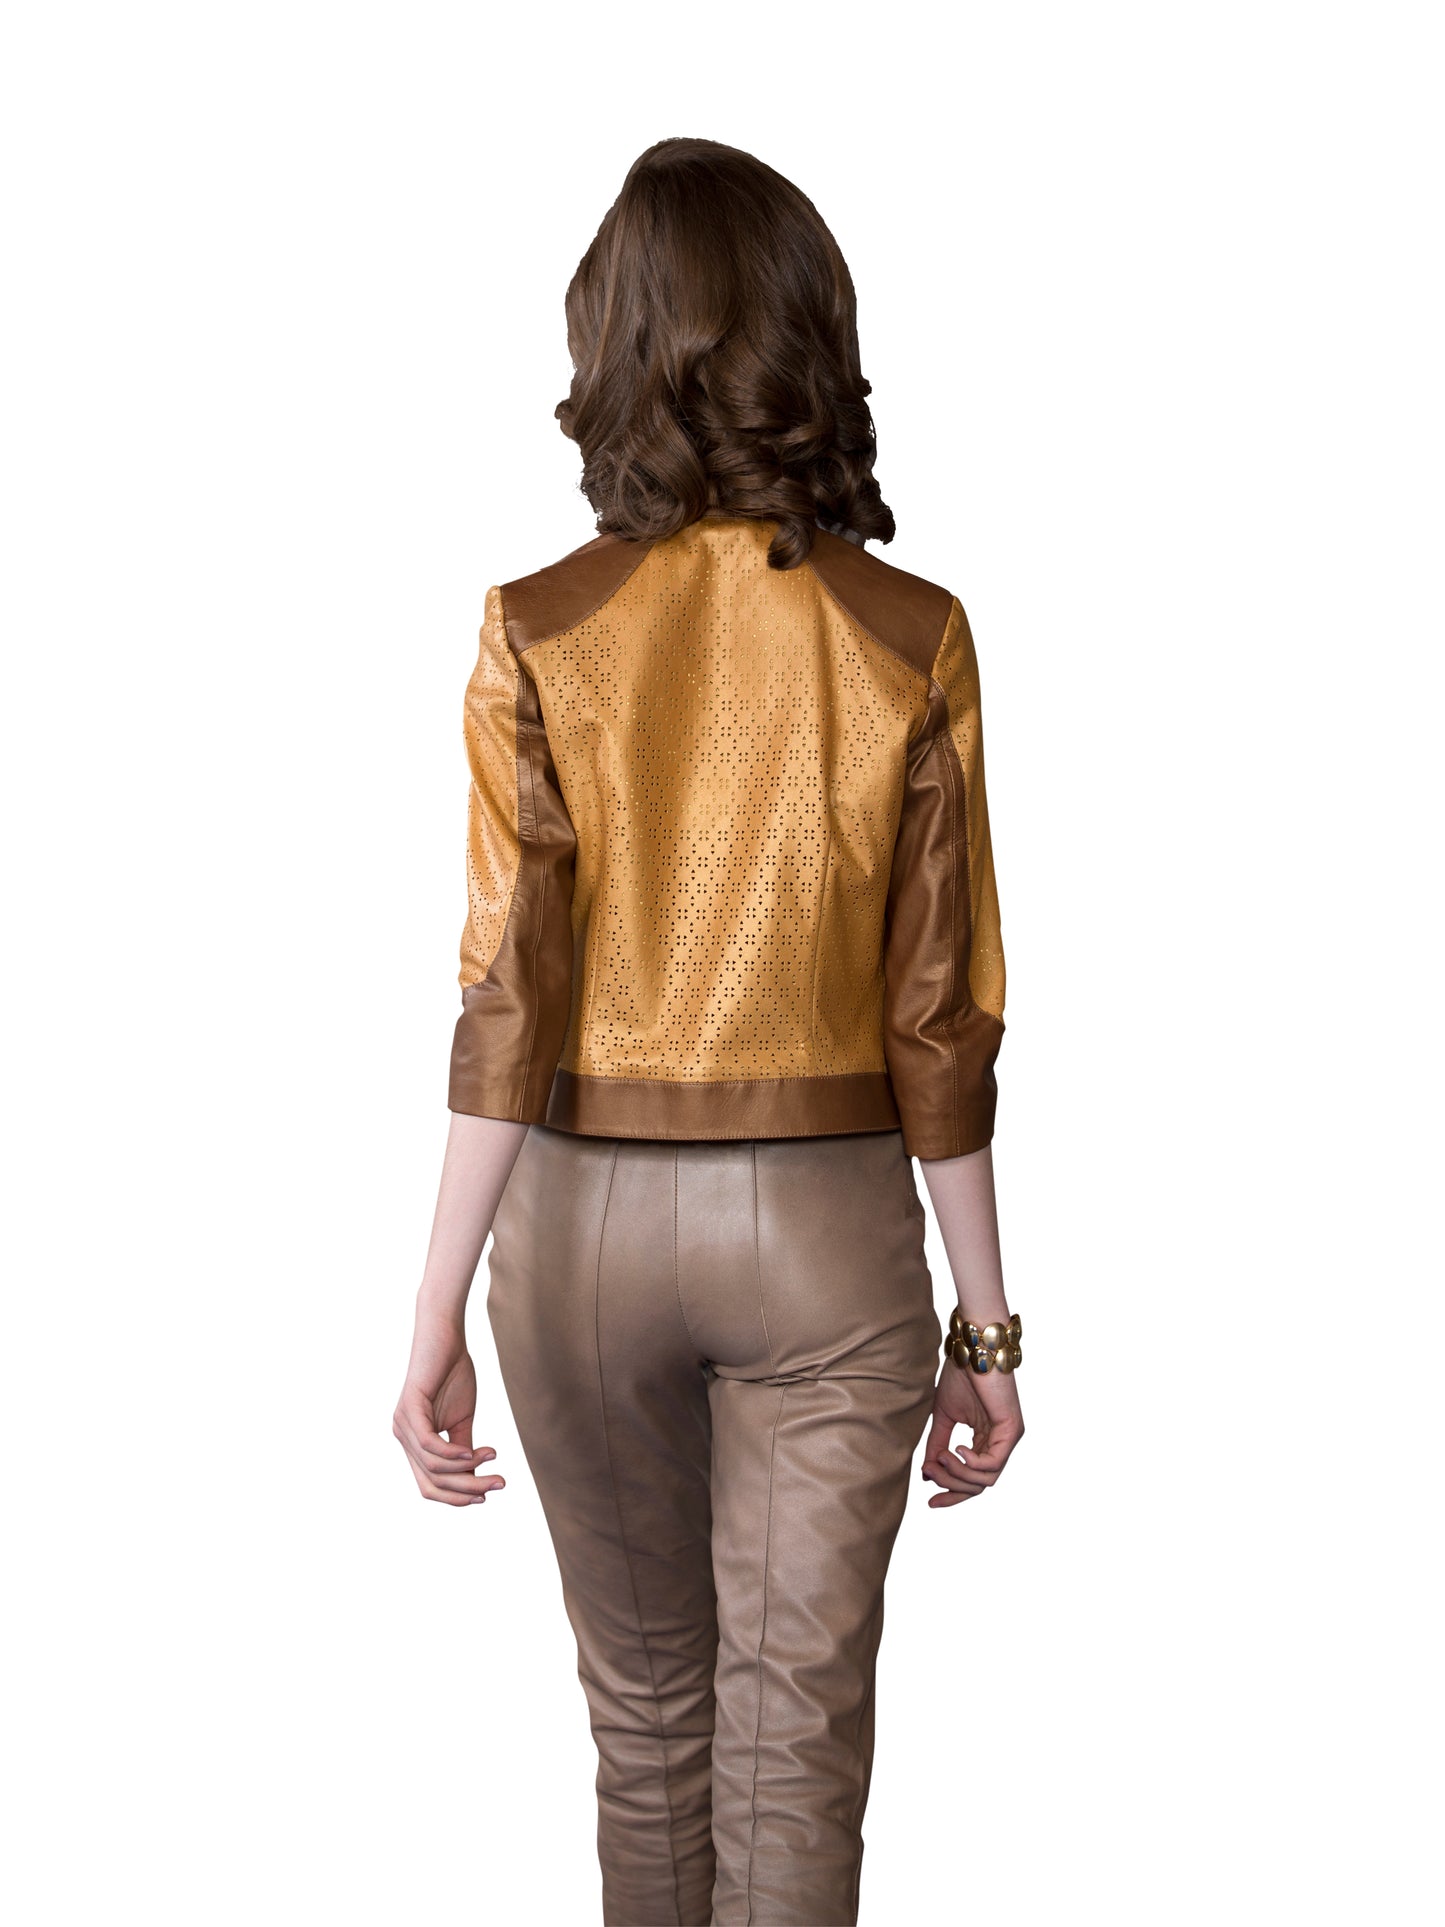 Beige Cropped Reindeer Leather Pants  Limited Edition - Only one left